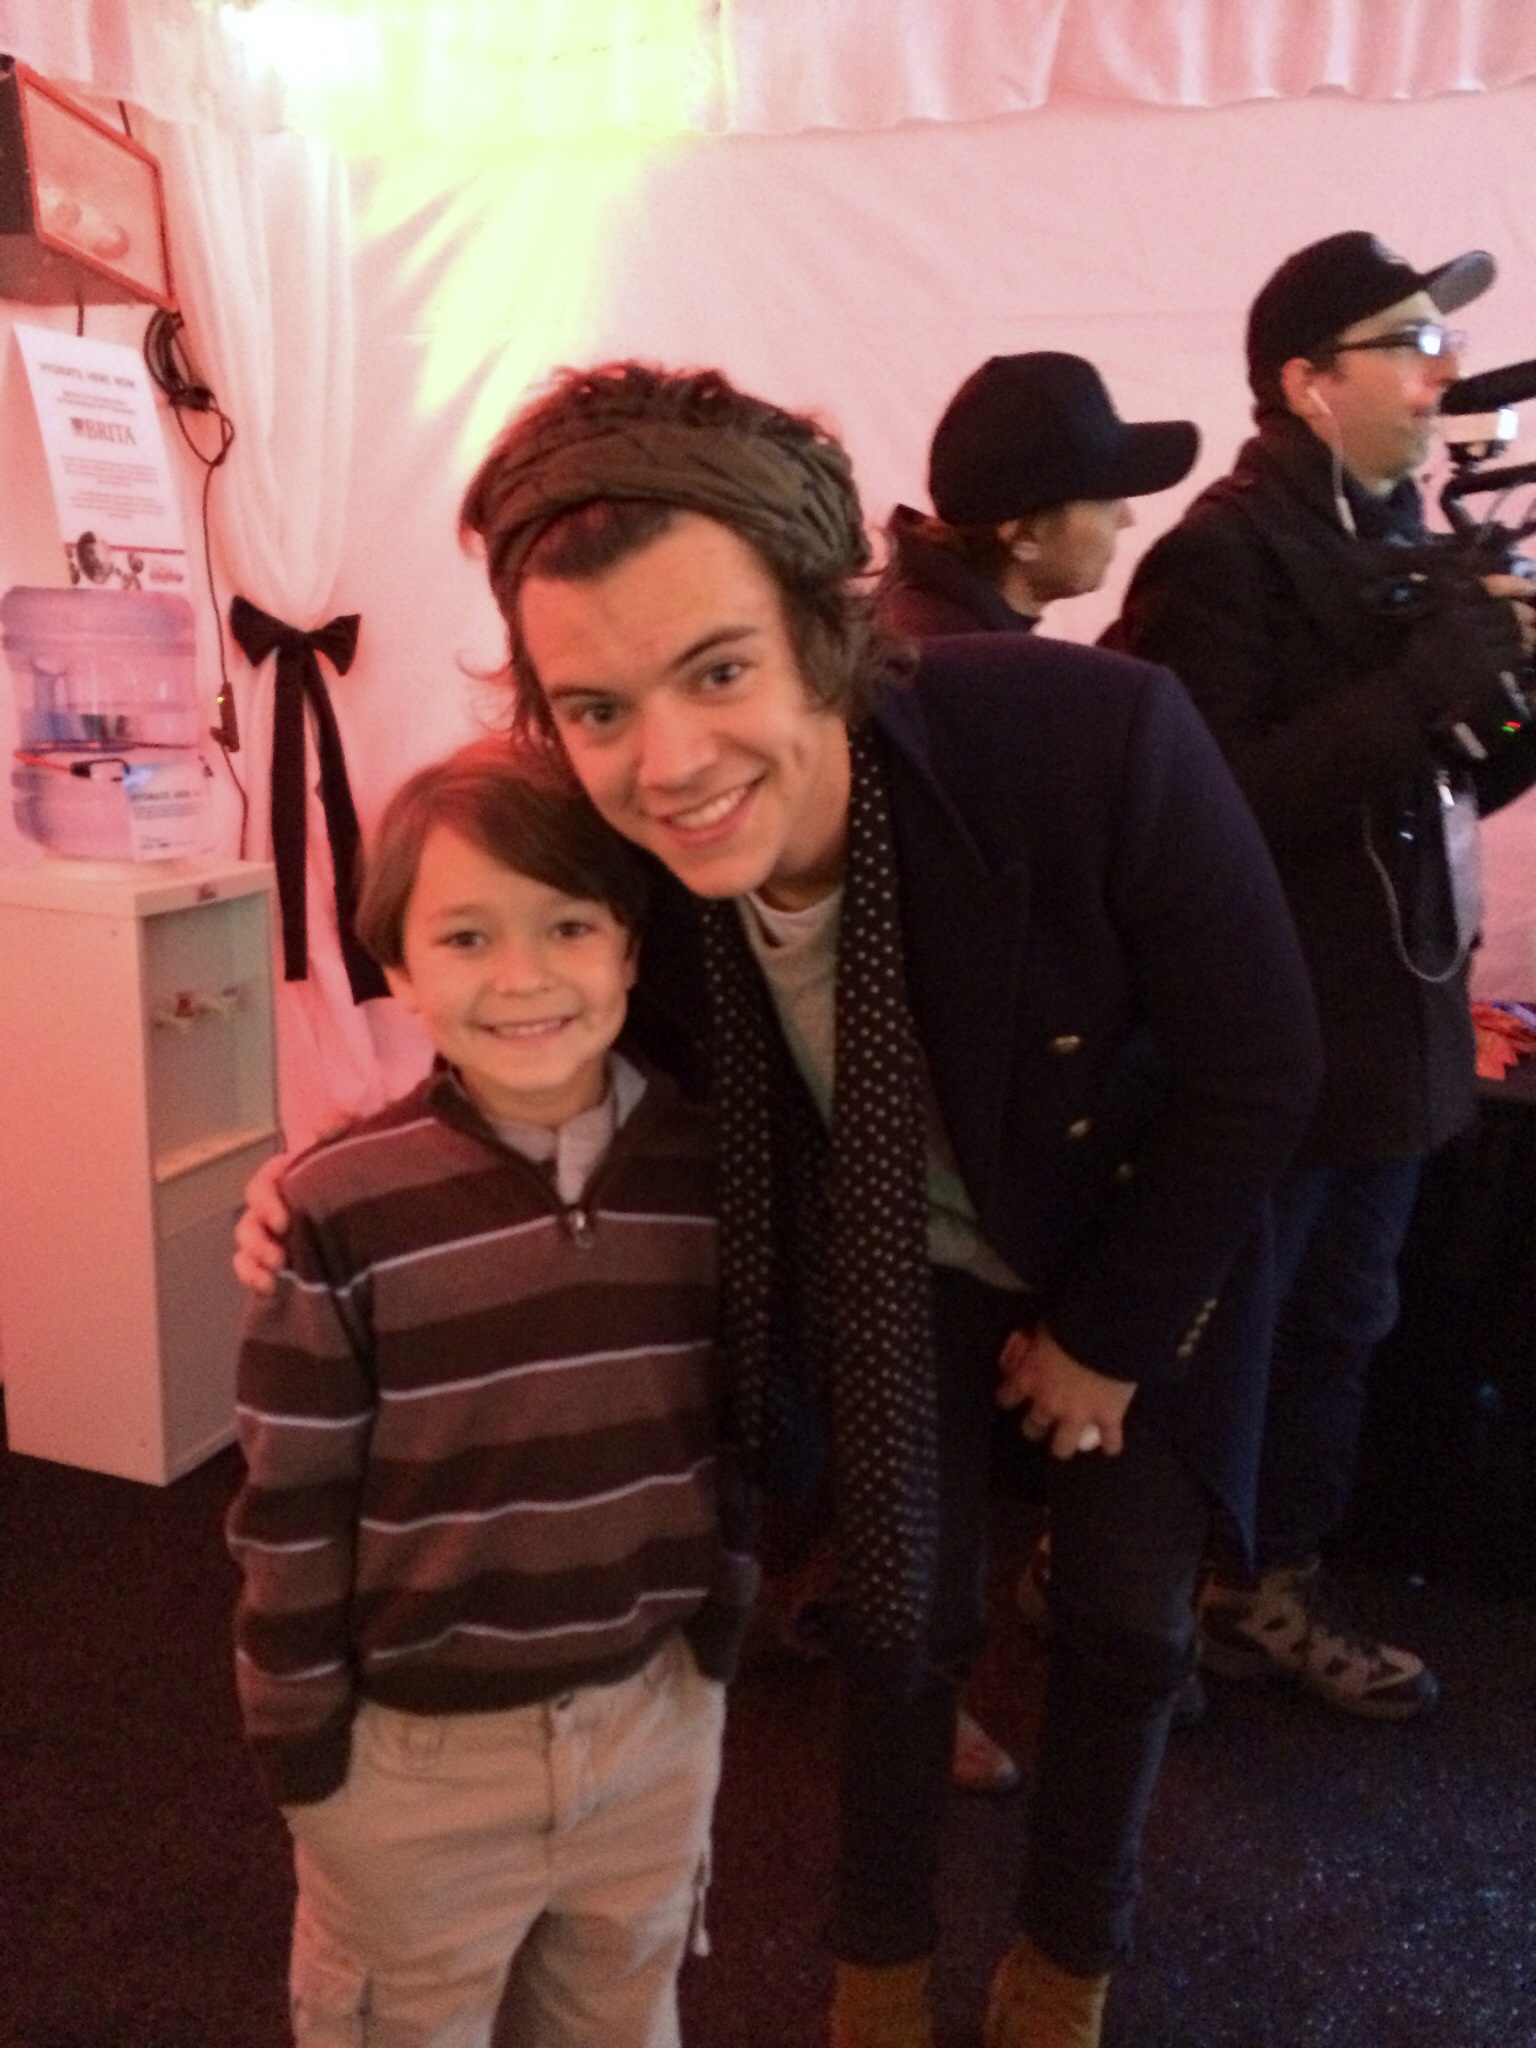 Pierce and Harry @ Sundance festival for Wish I was Here premiere.